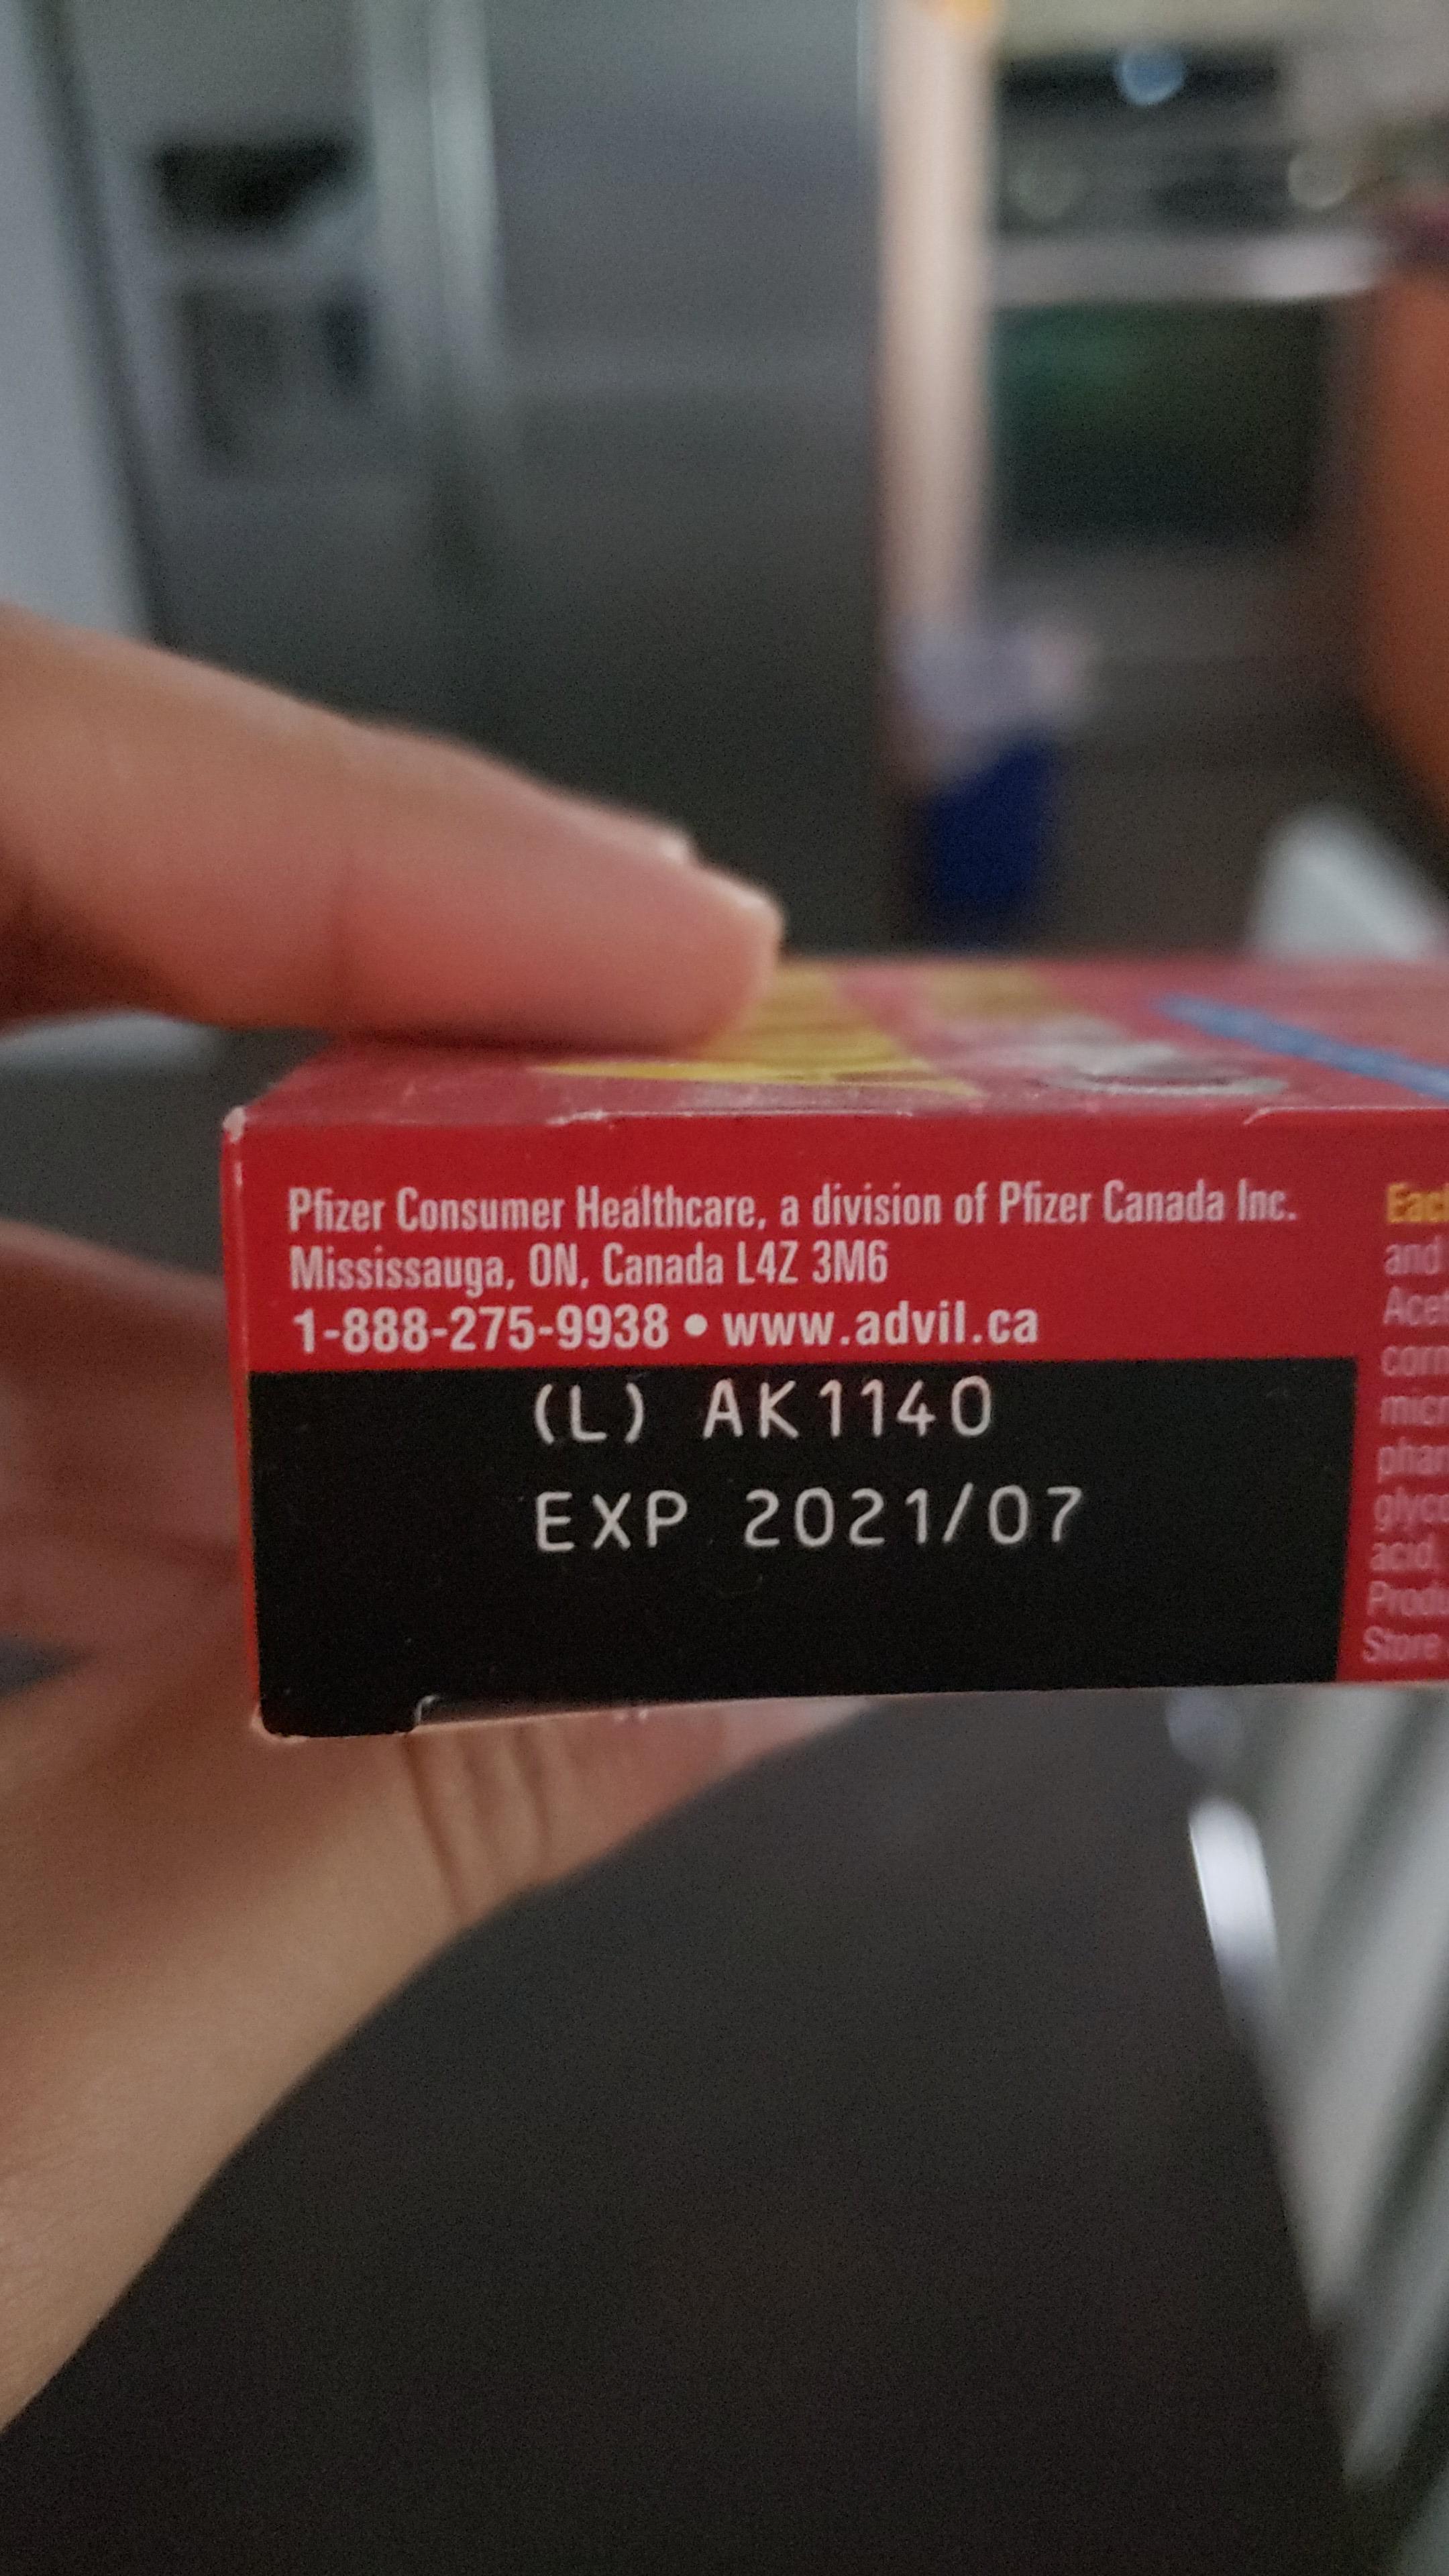 A red and white box of Advil pills with a label showing the product name, manufacturer, and expiration date.